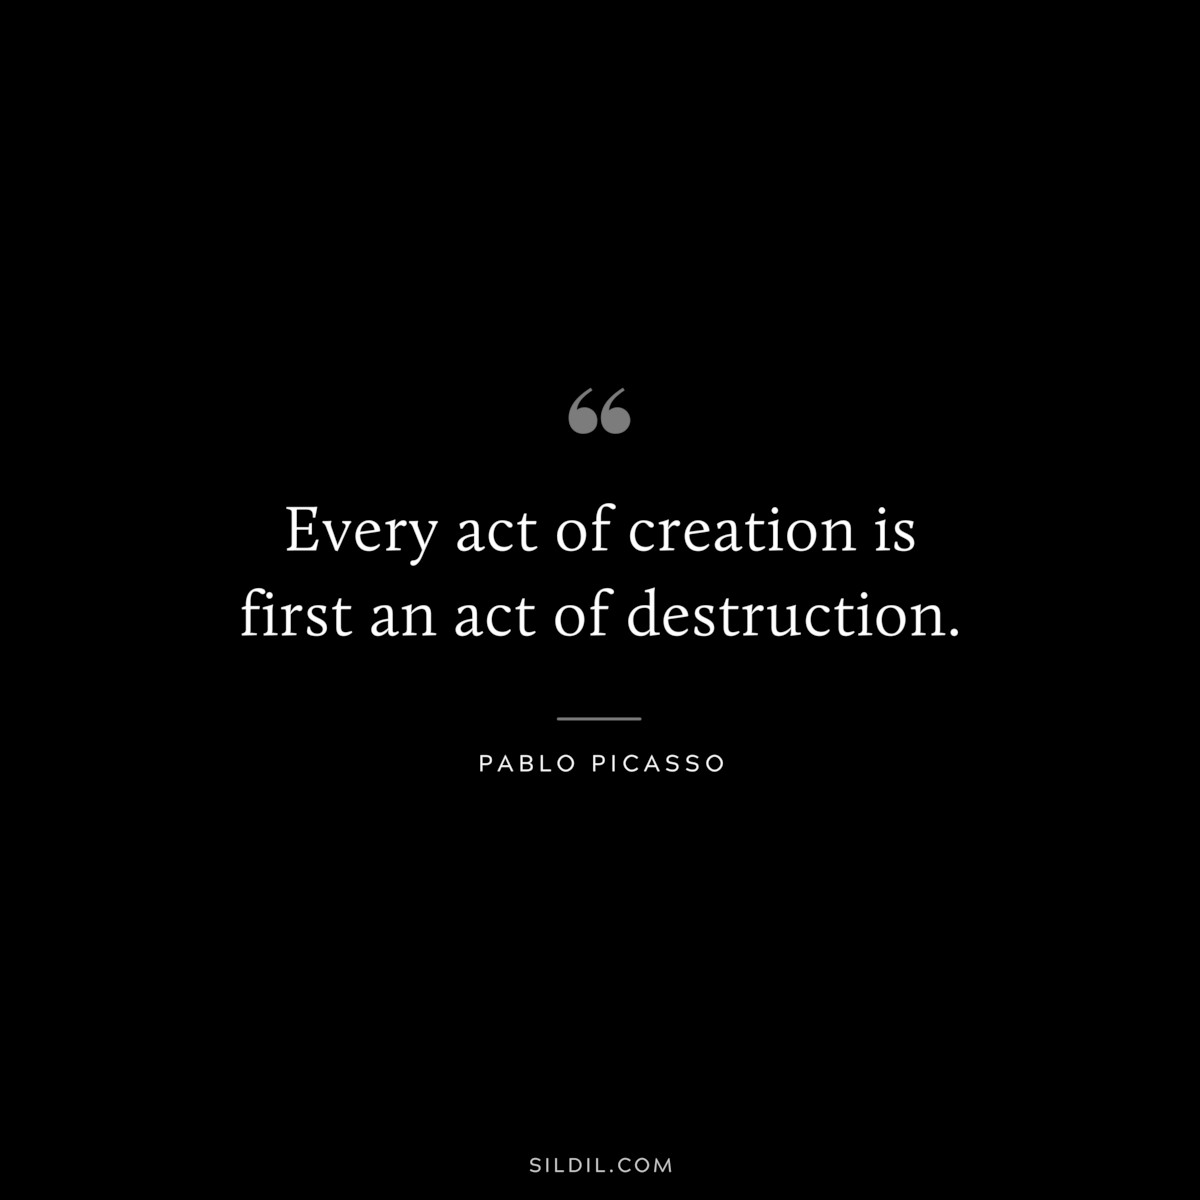 Every act of creation is first an act of destruction. ― Pablo Picasso